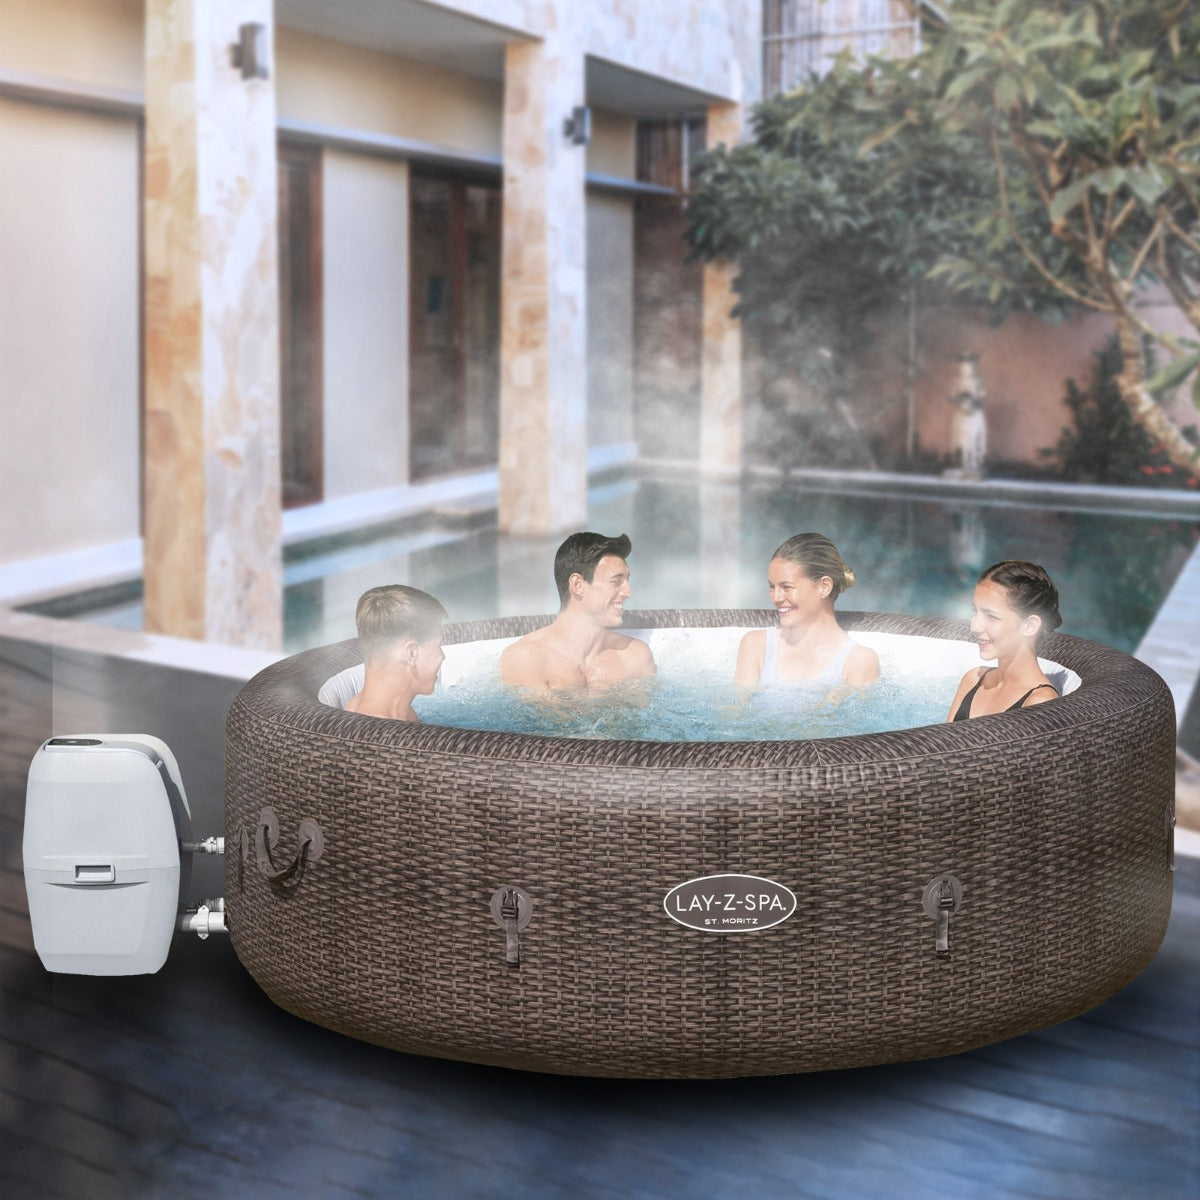 Z St. Lay Moritz Heated Gigantic! Spa Outbax Hot | Bestway Tub